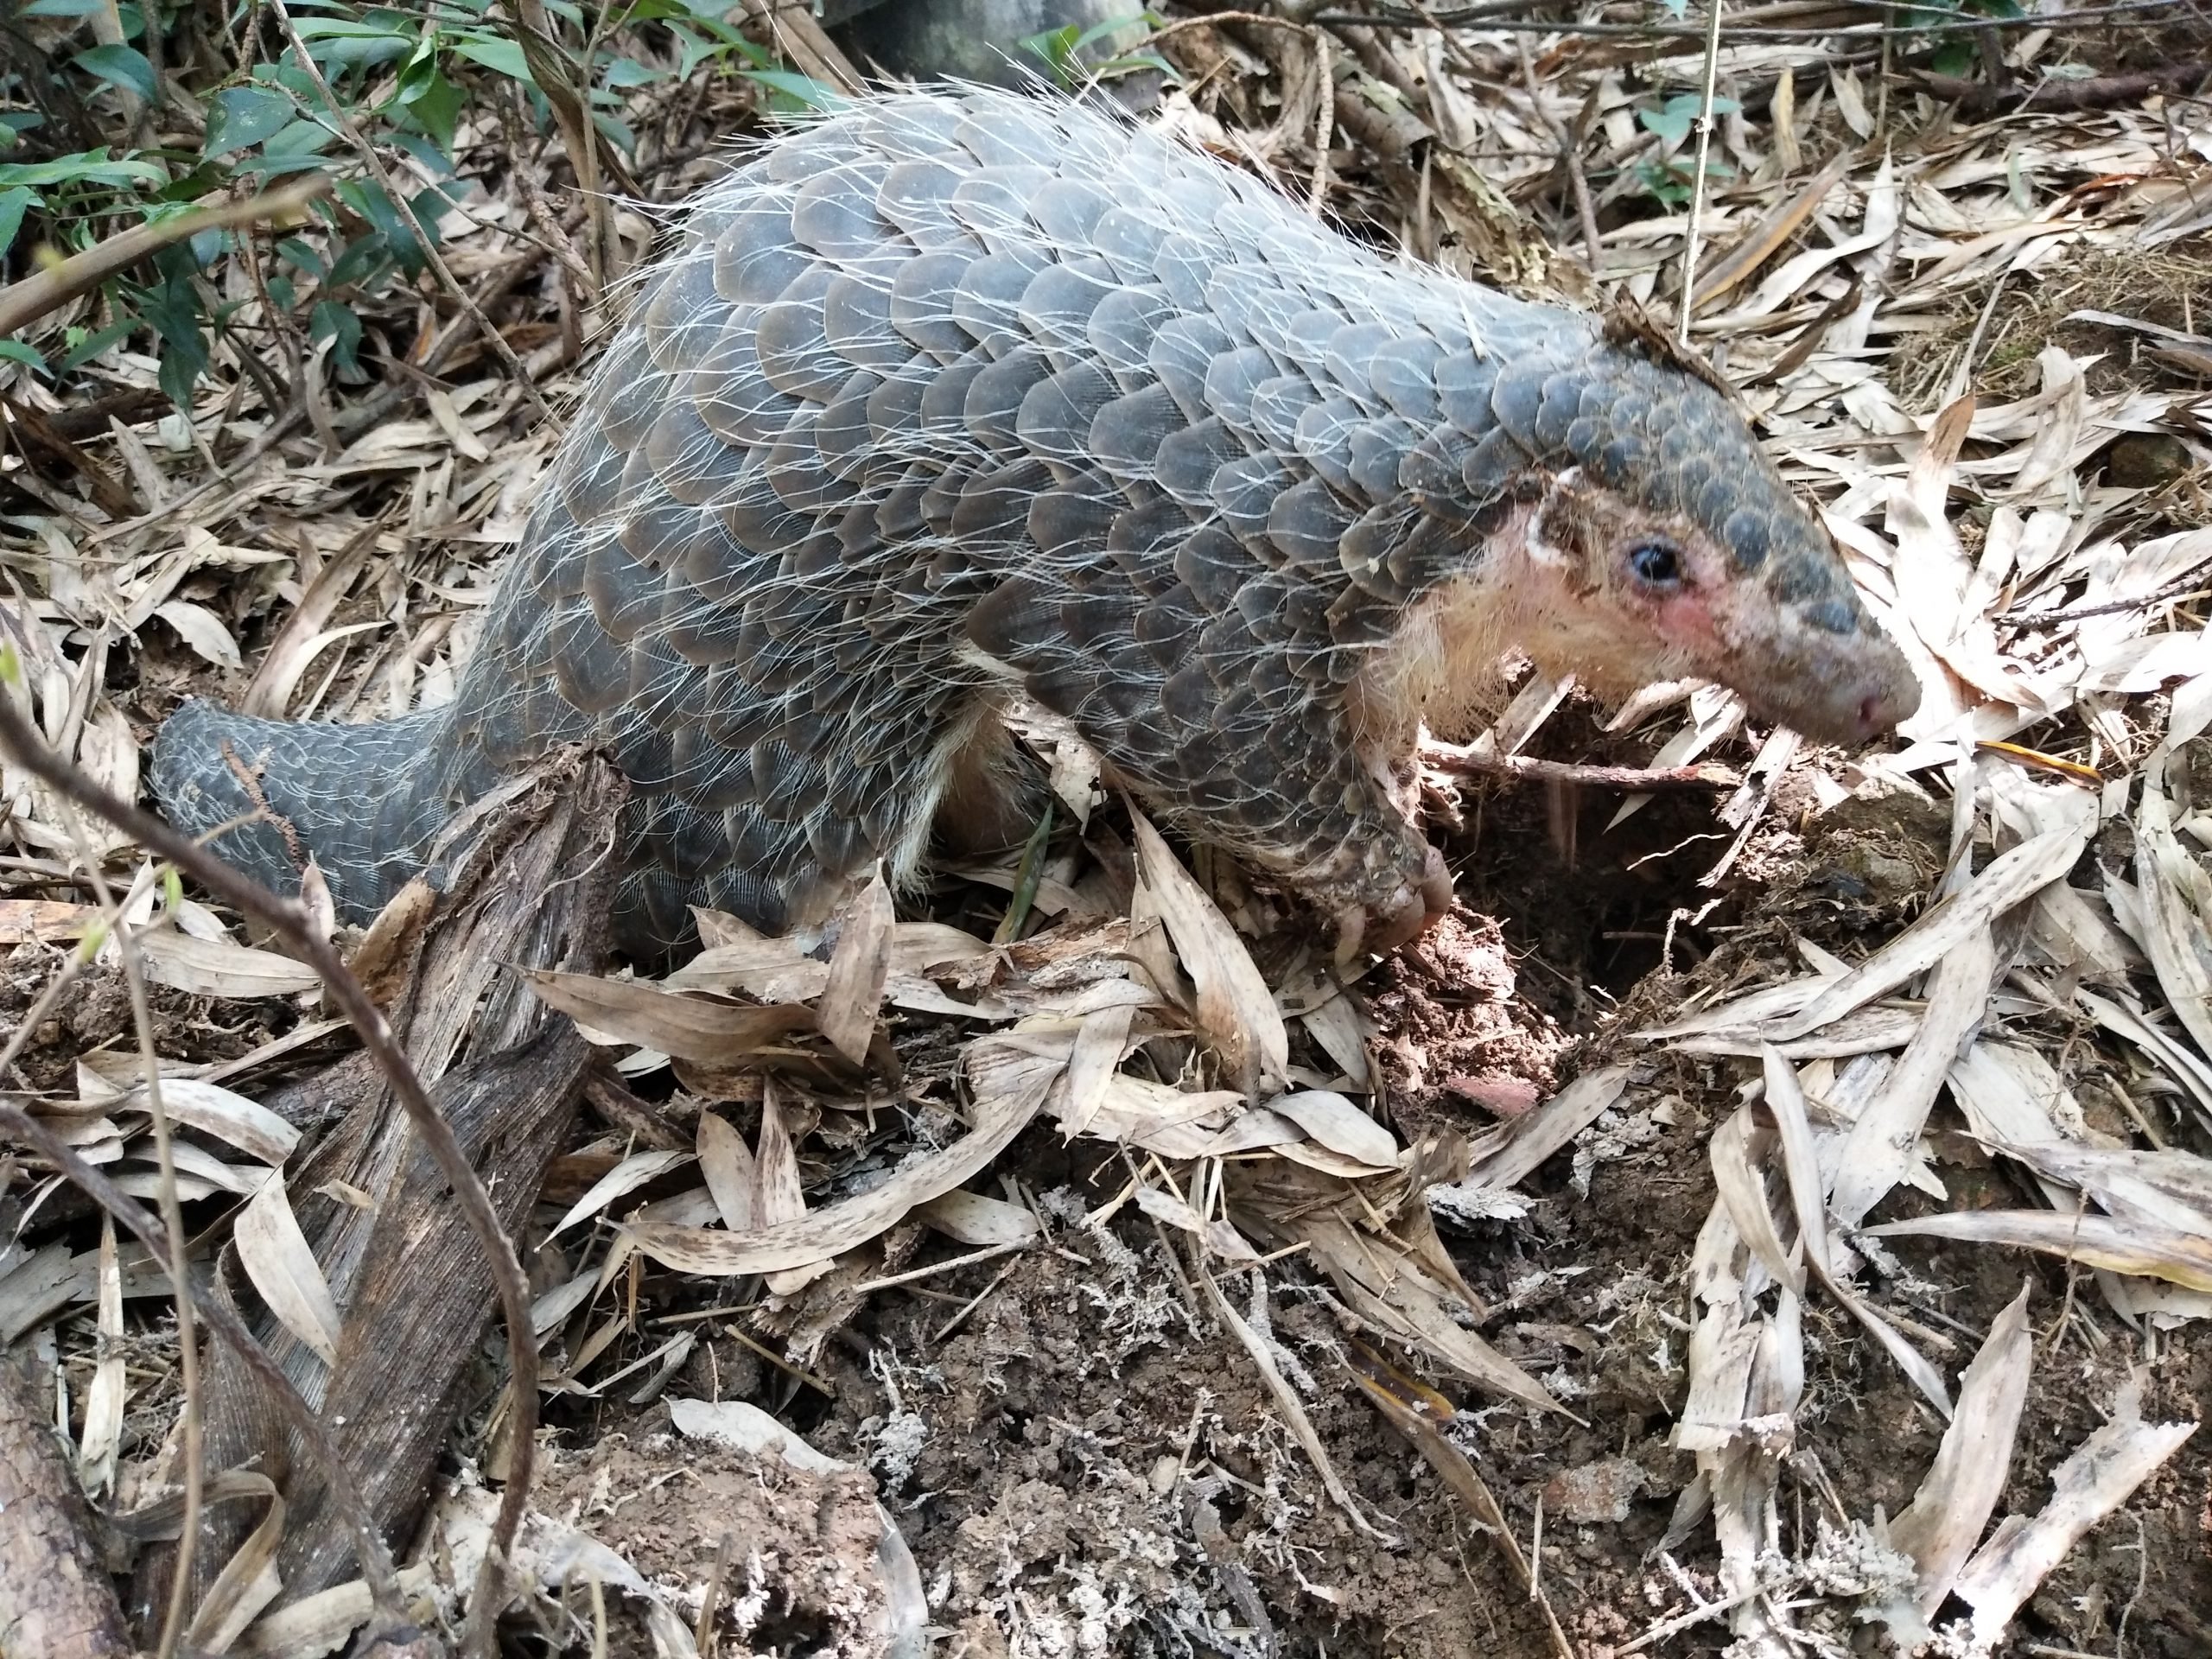 <p>Pangolins are the most trafficked creatures in the world, valued for their meat and their supposed medical properties [image by: Wang Yan]</p>